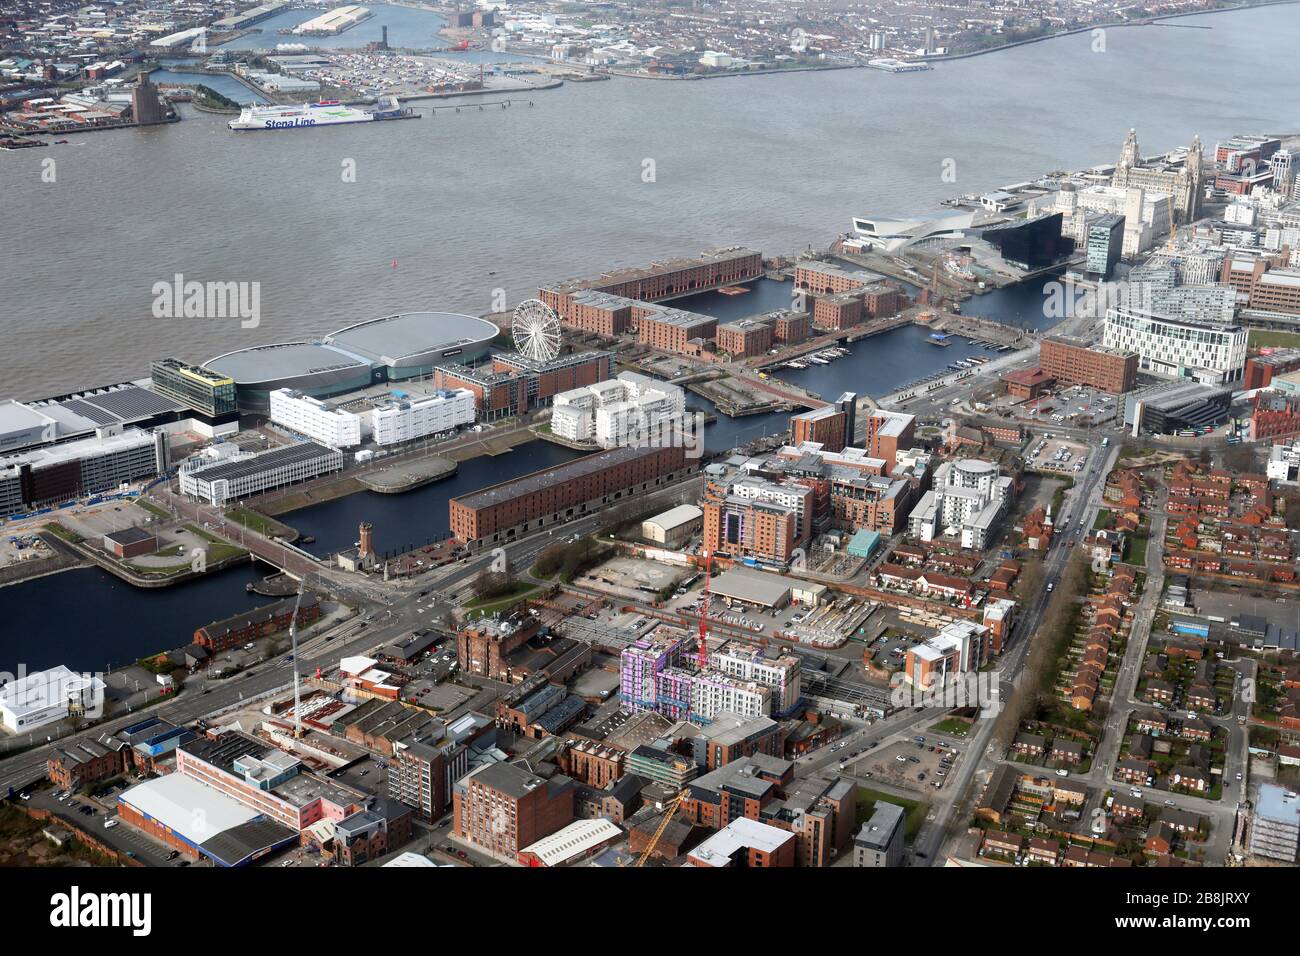 aerial view of the Liverpool skyline with the Royal Albert Dock & M&S Bank Arena prominent Stock Photo